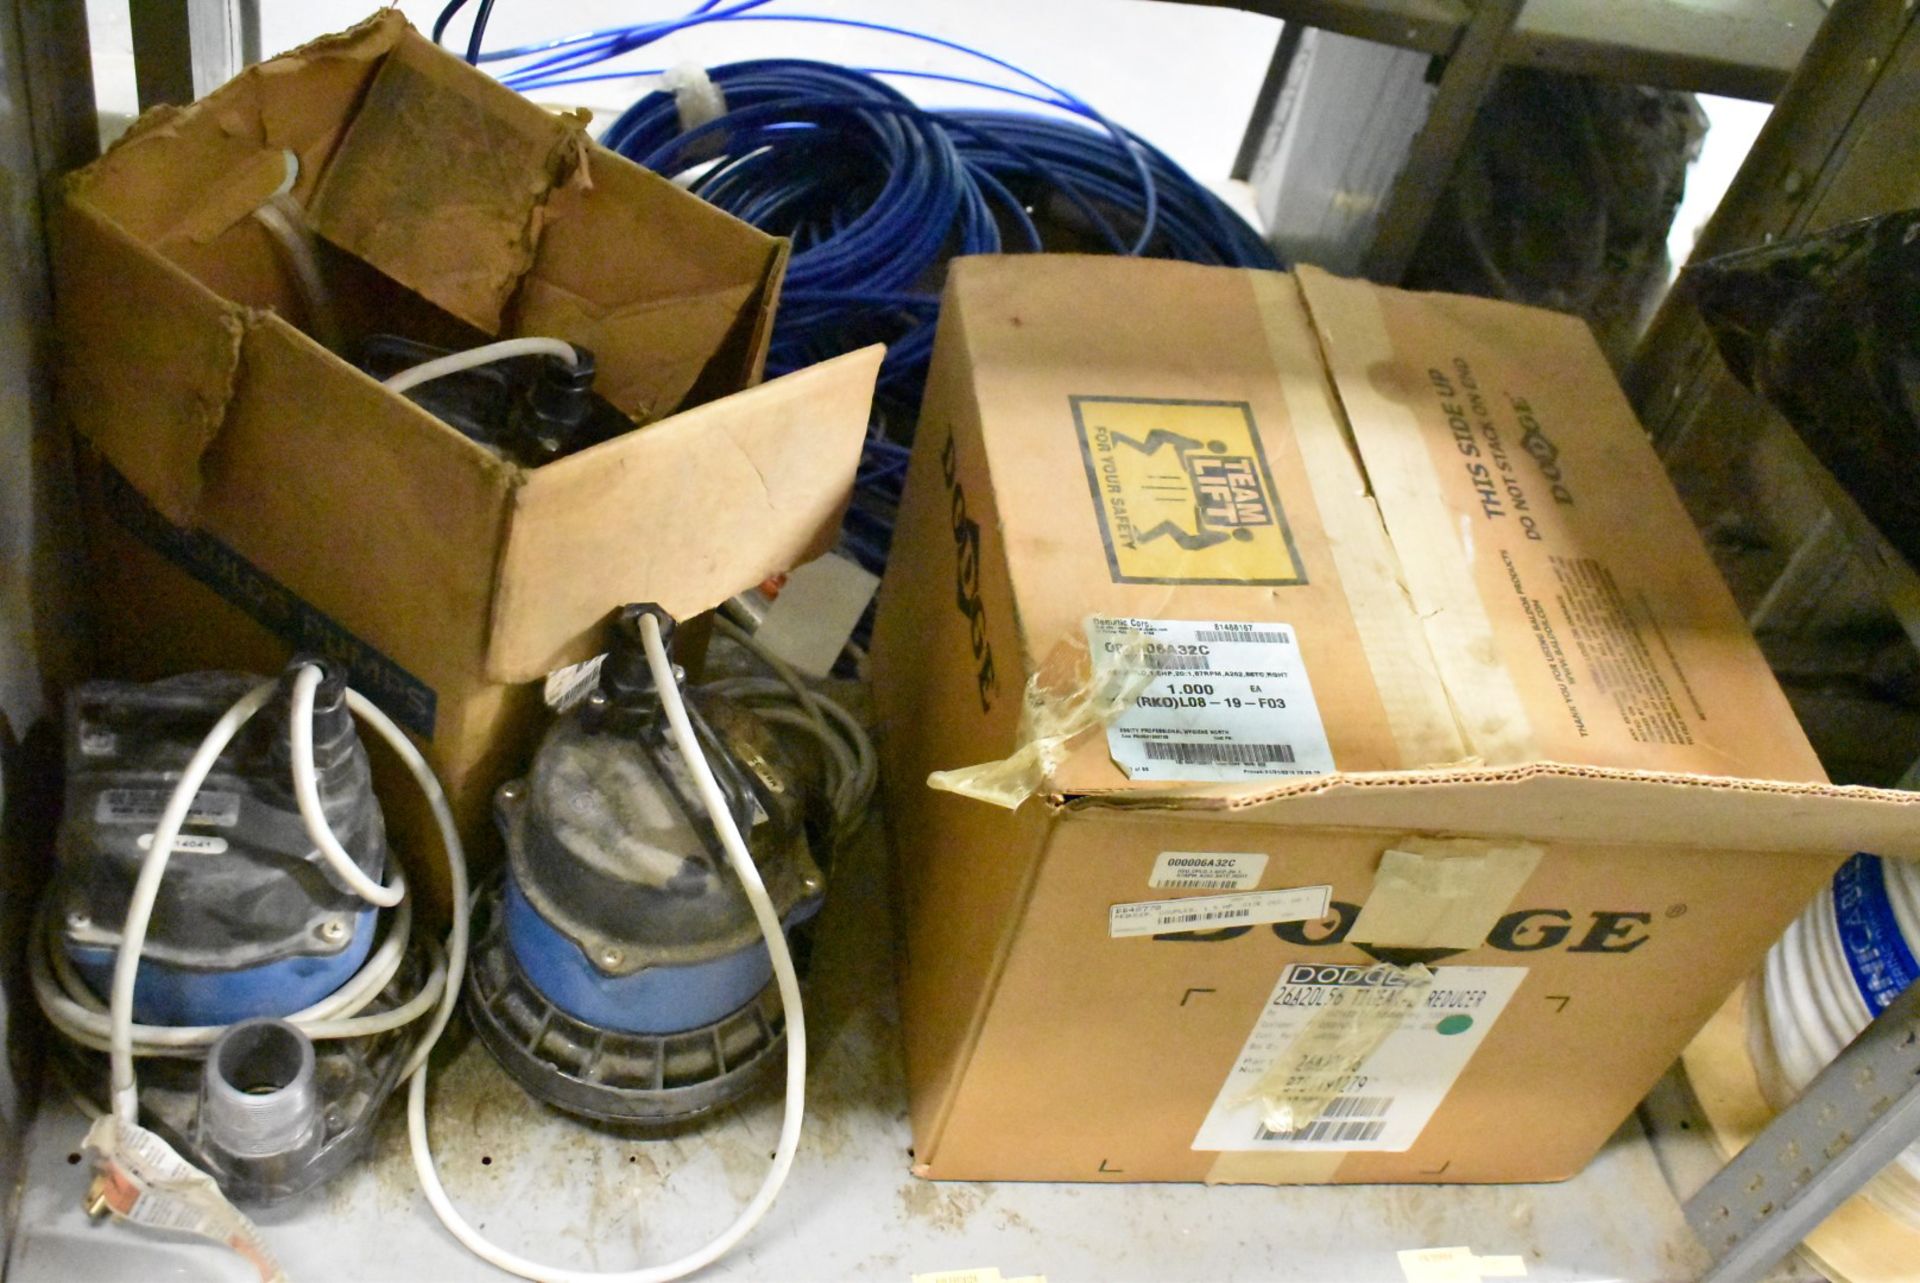 LOT/ CONTENTS OF SHELF - INCLUDING BAND SAW BLADES, CONVEYOR BELTING, POLYWIRE HOSE, SUMP PUMPS [ - Image 5 of 5